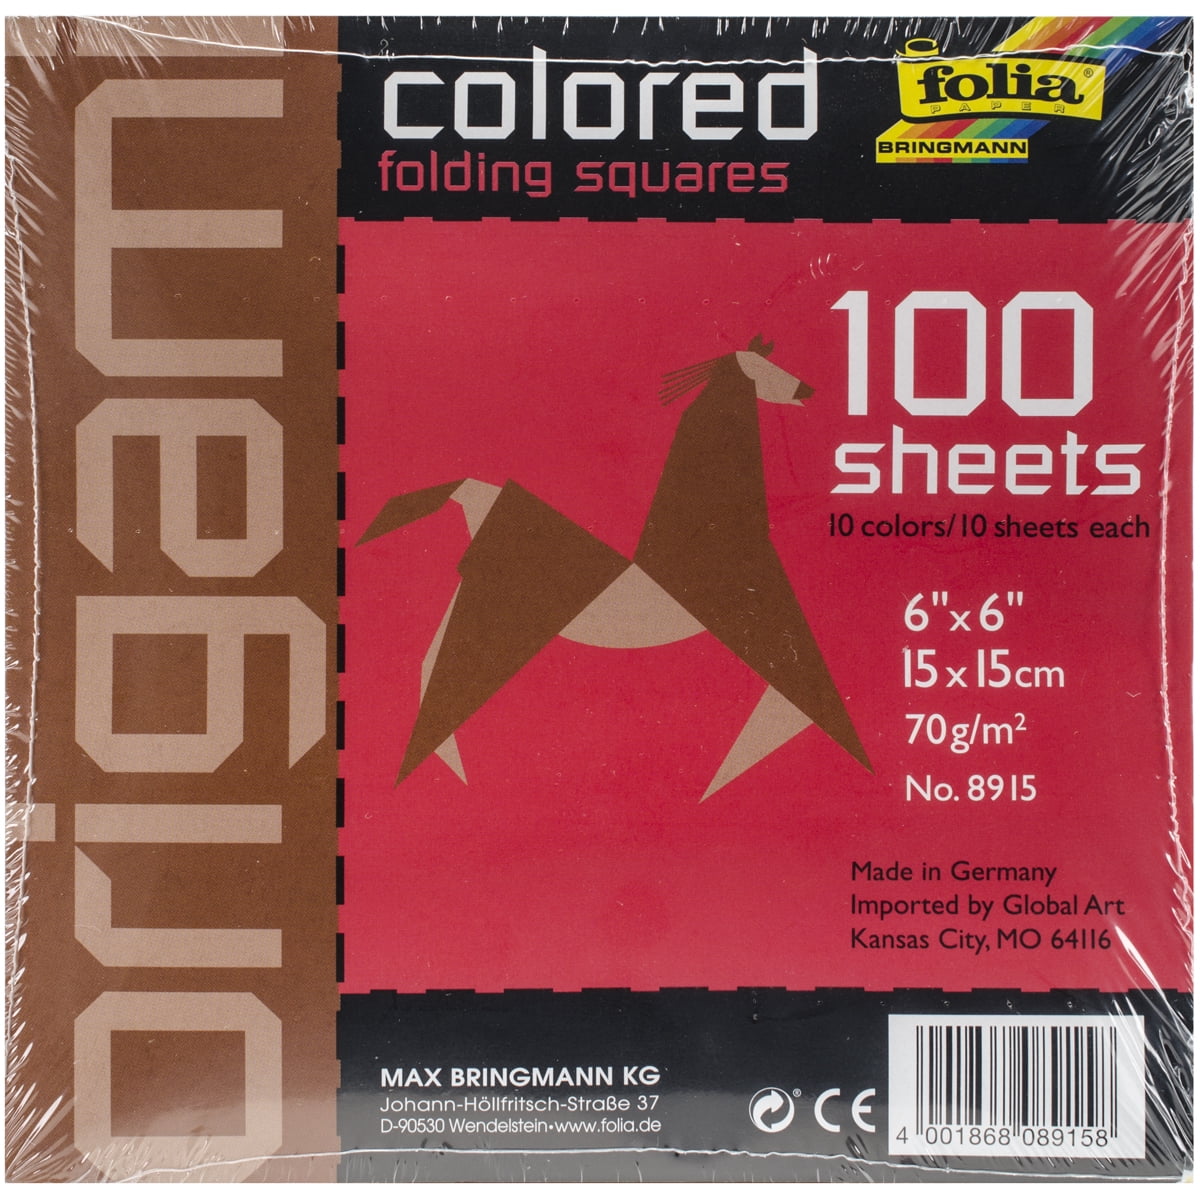 Origami Paper 5.875X5.875 18 Sheets Assorted Foil/Solid Double-Sided